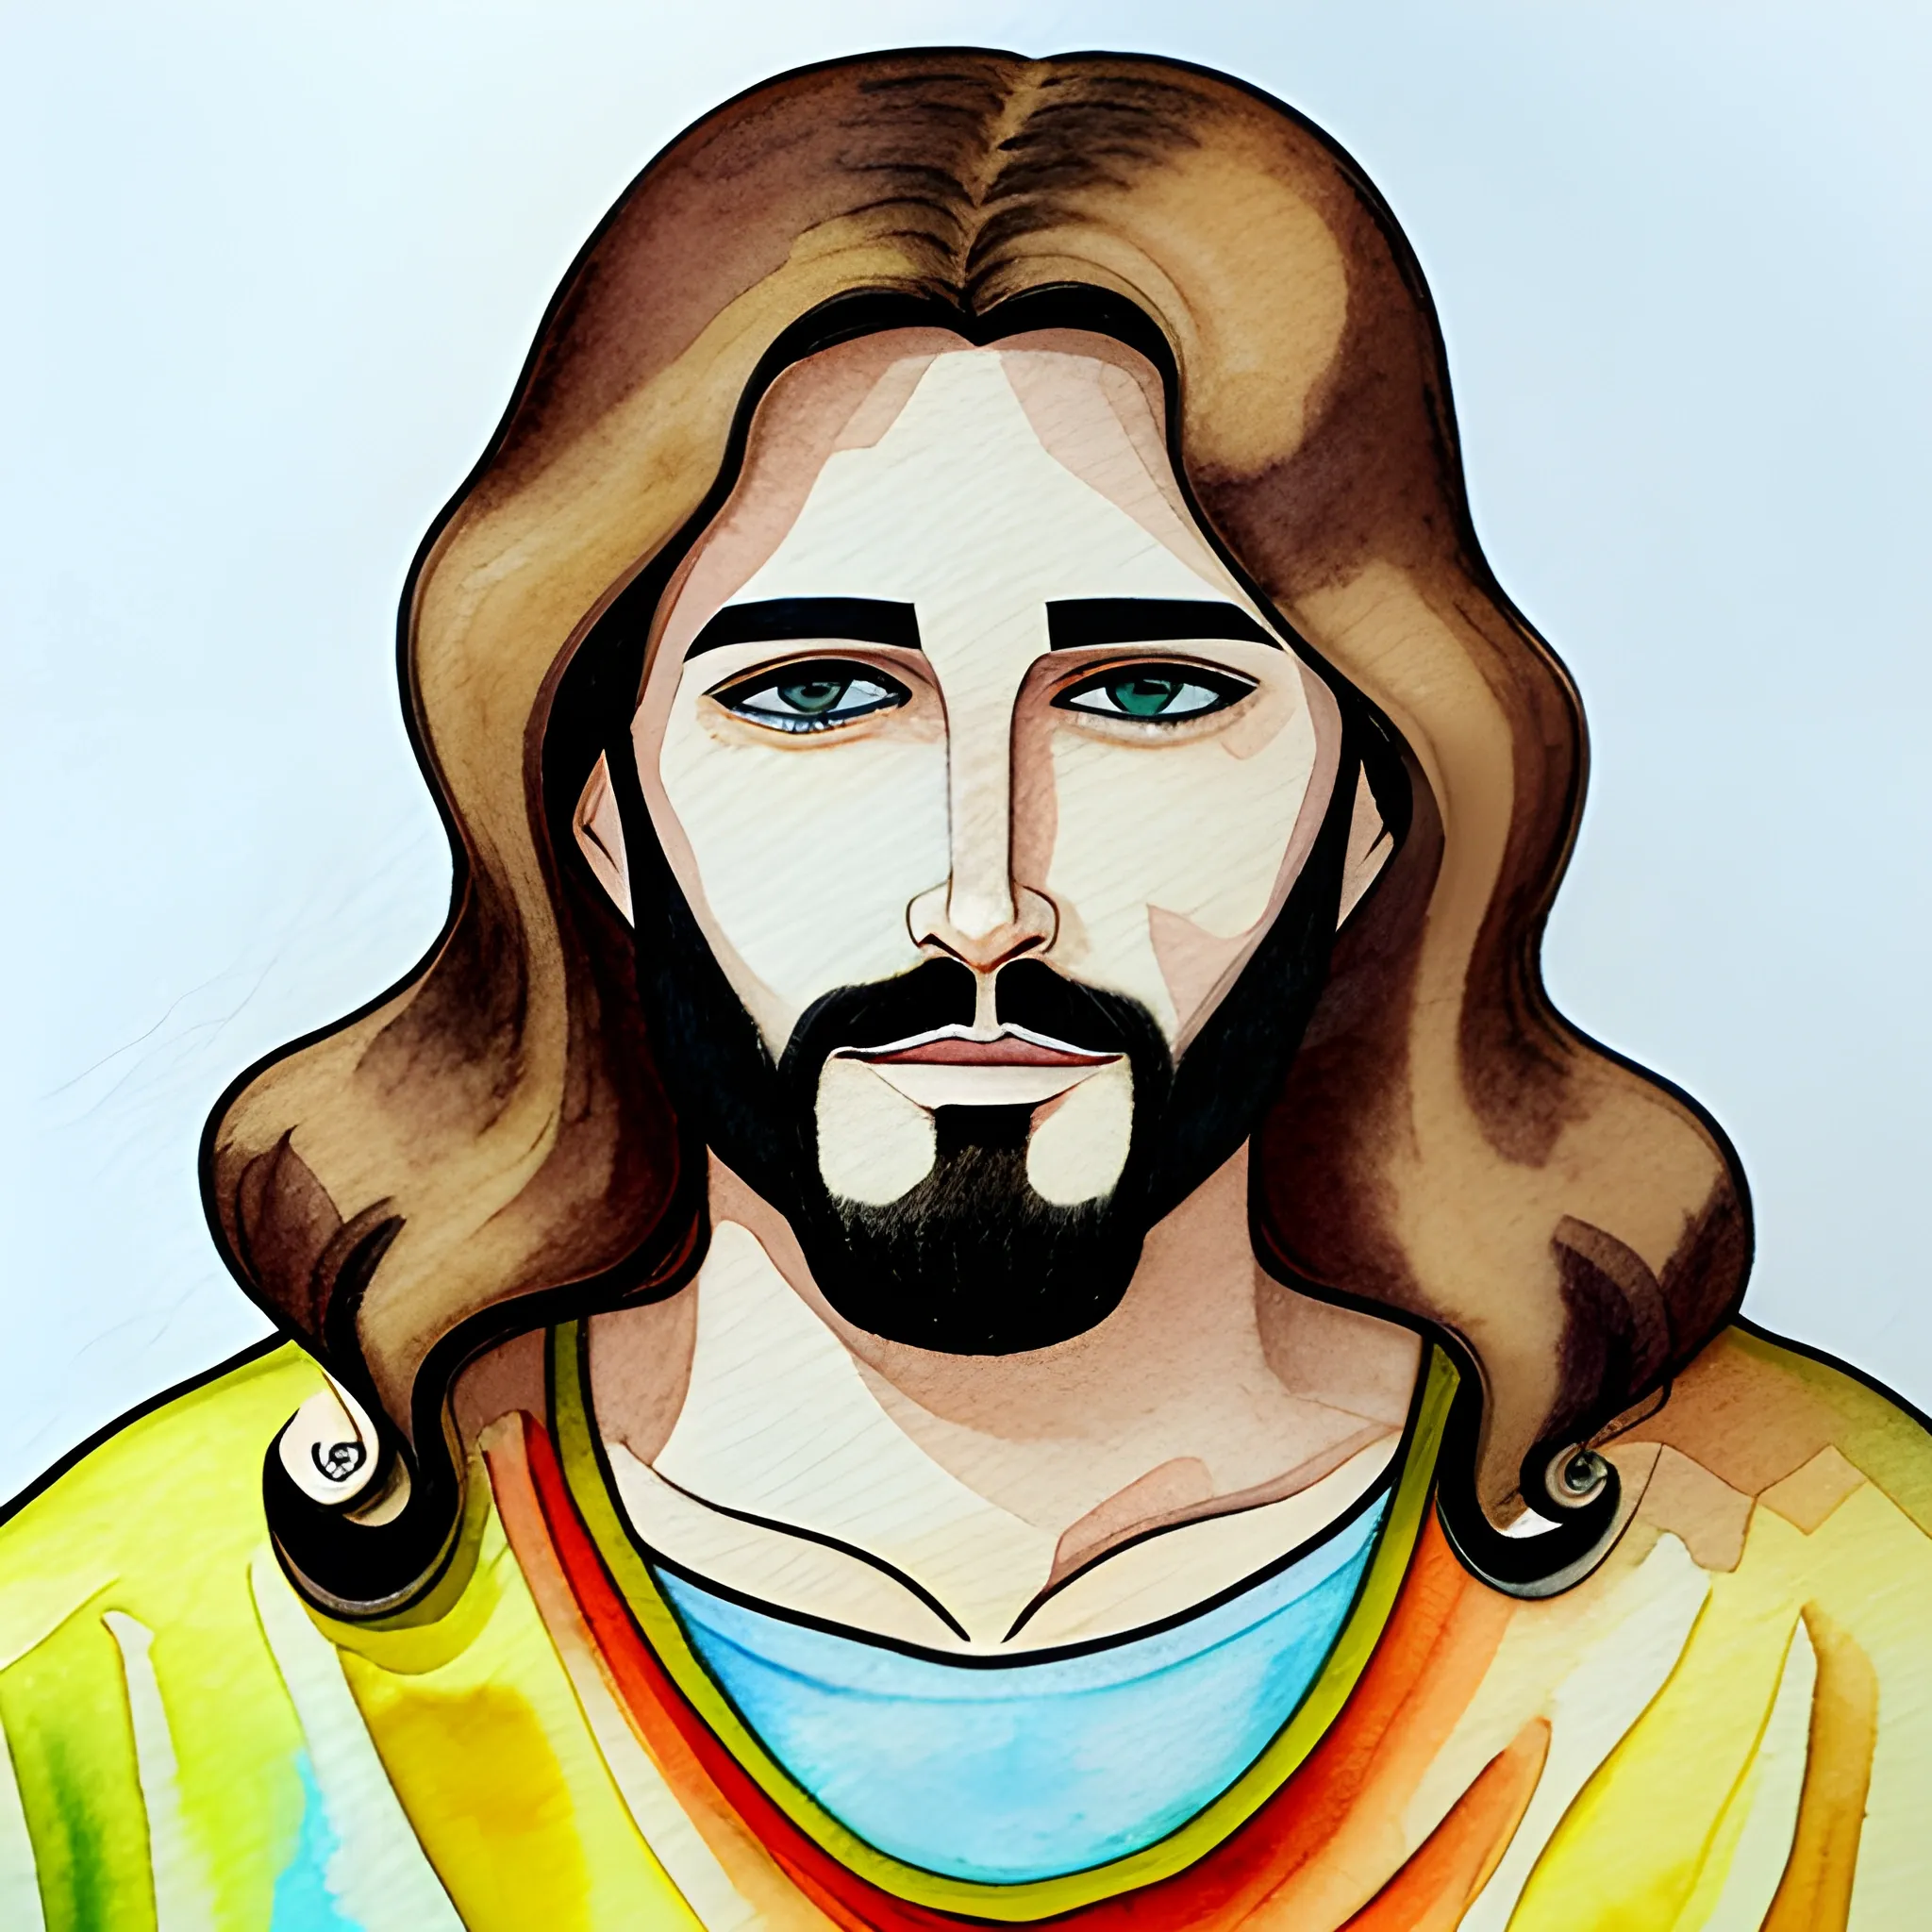 Jesus drawing | How to draw Jesus Christ easy | Colour pencil drawing|  drawing of Jesus |Simpleart | Jesus drawings, Color pencil drawing, Drawings